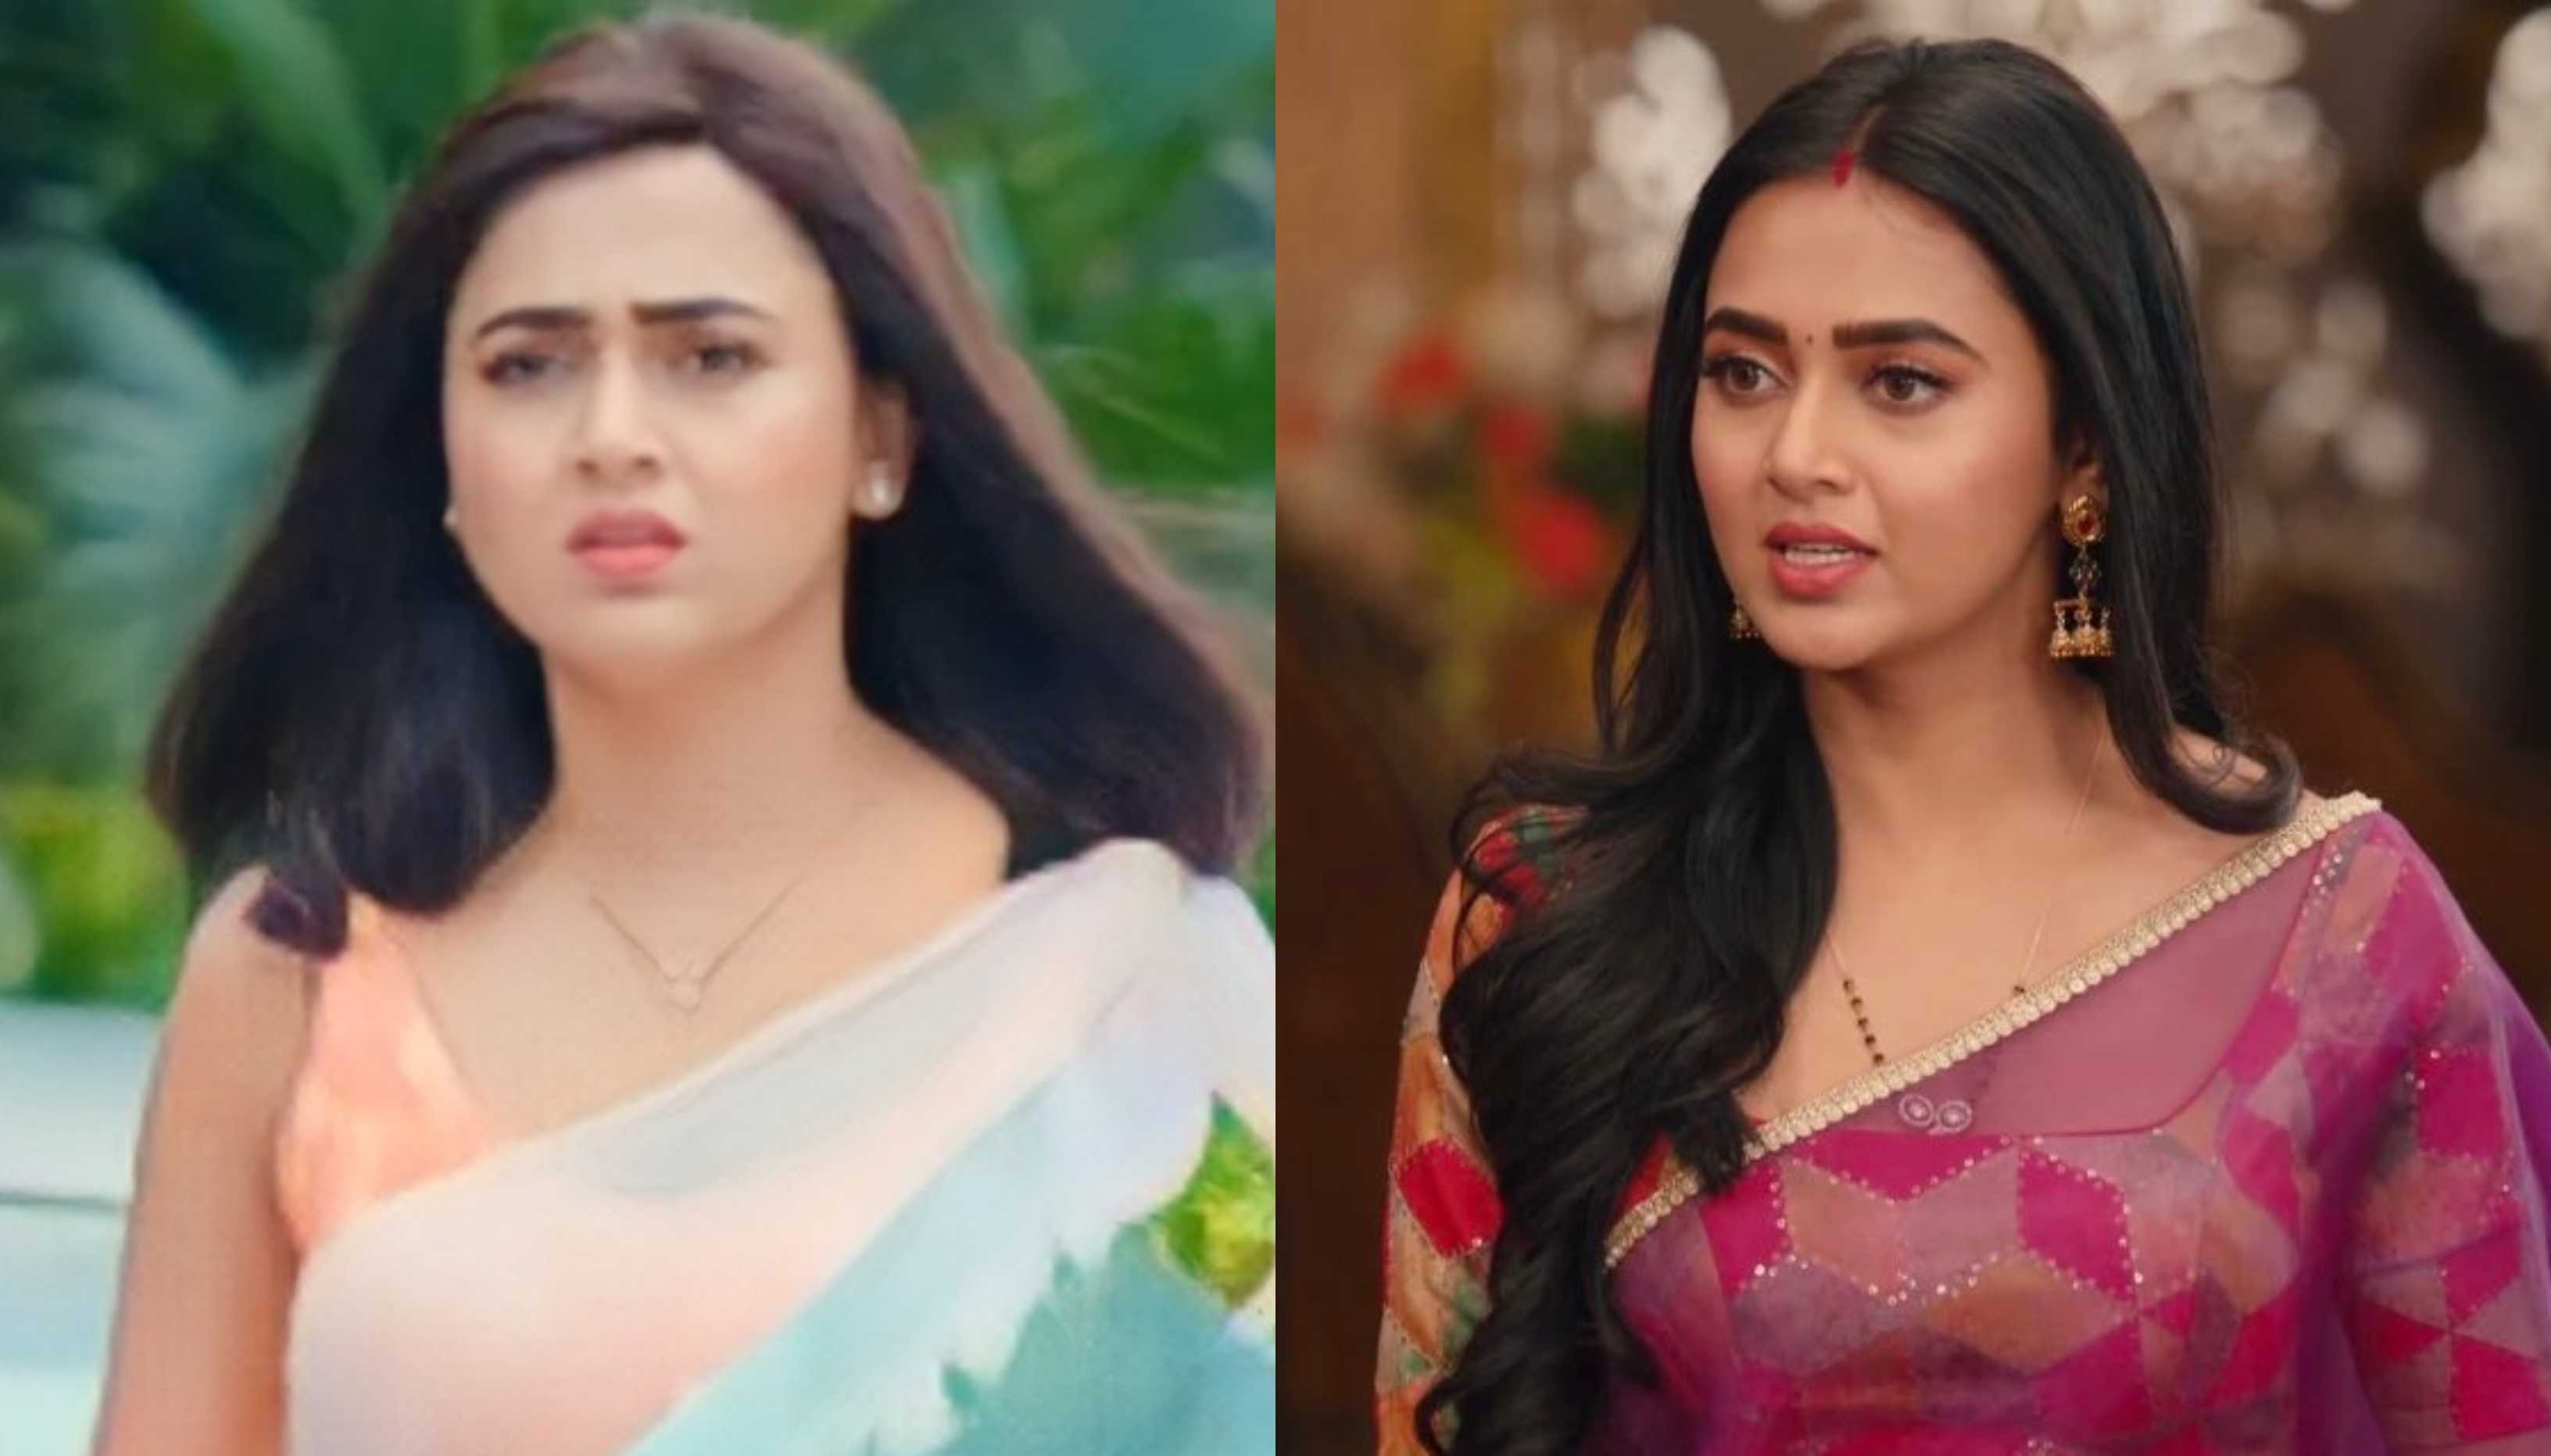 Tejasswi Prakash’s fans are sad with reports about Naagin 6 going off air; shower love on Pratha aka Kiara